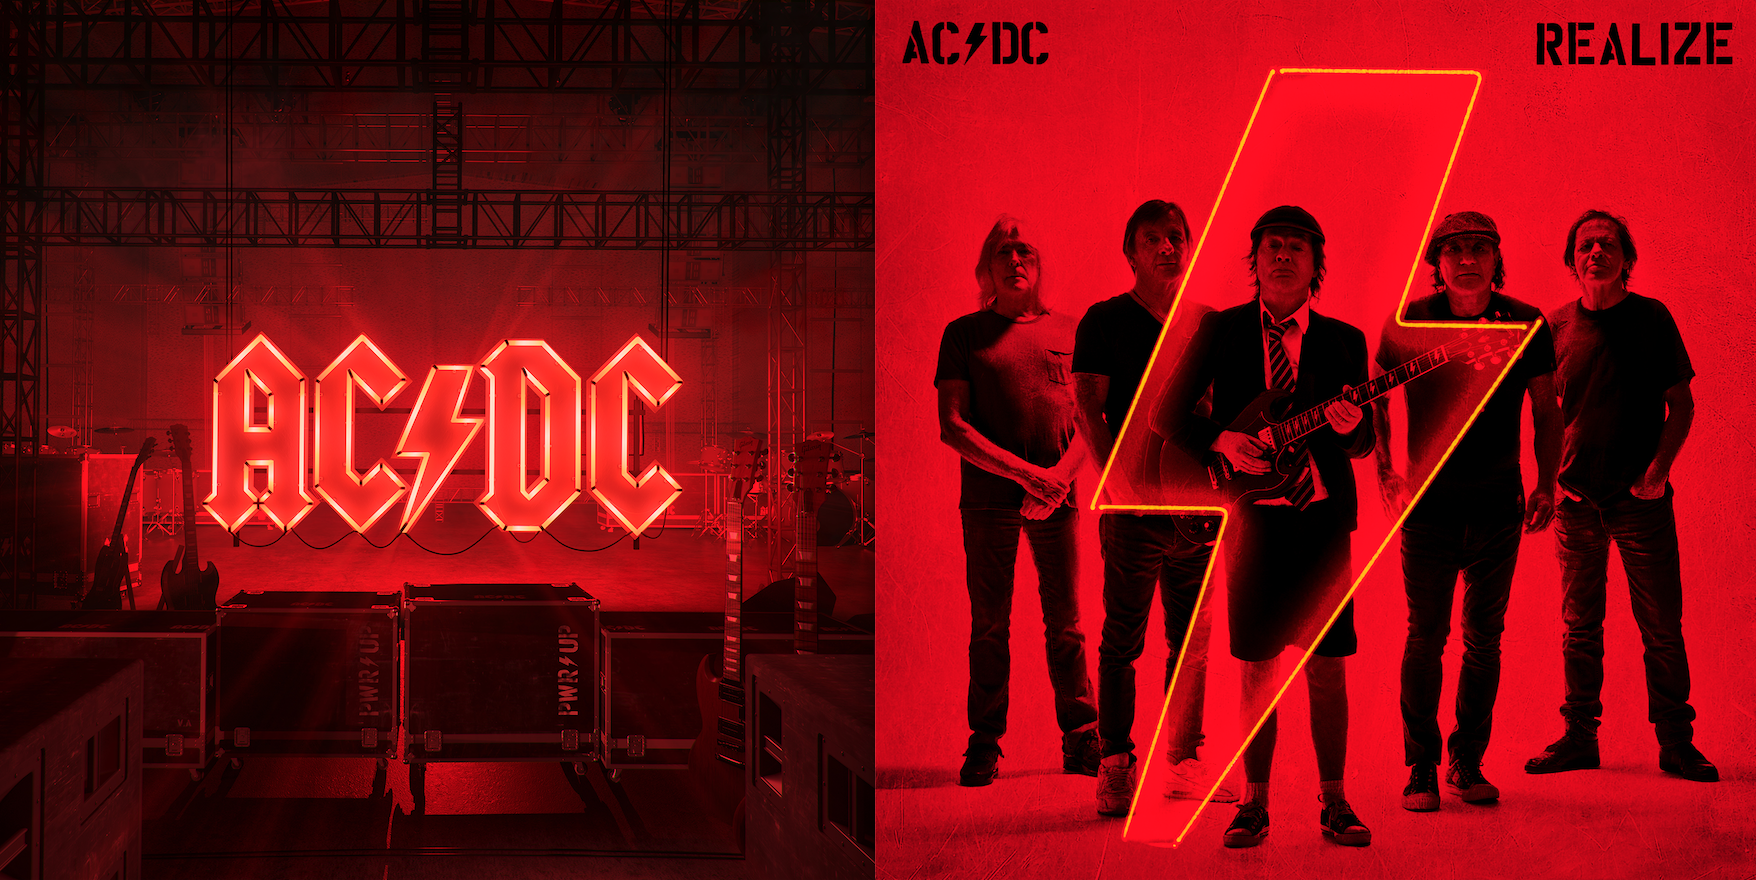 AC/DC release new single 'REALIZE' - Listen Now! 